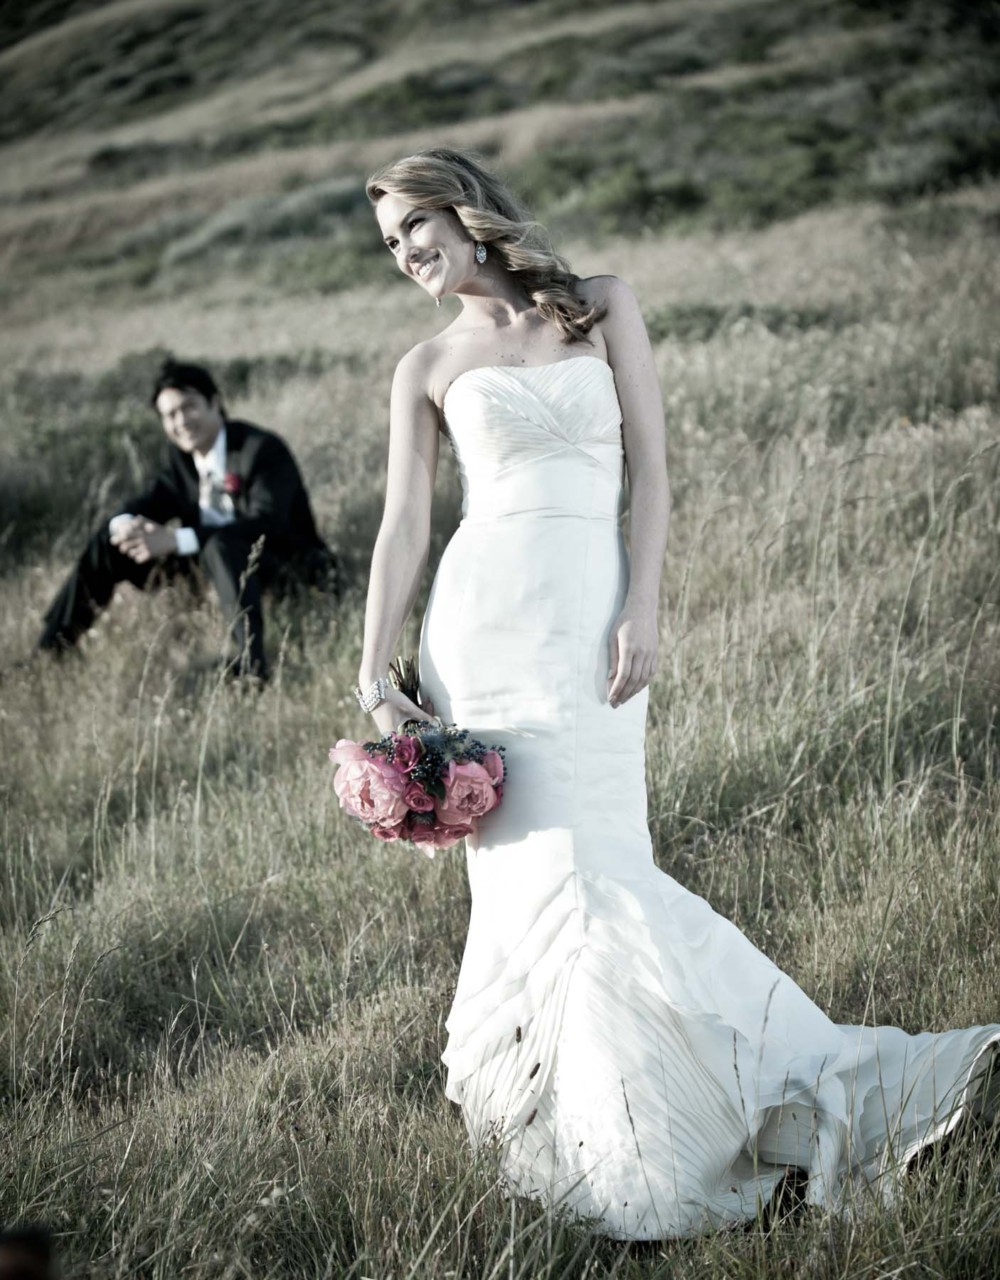 Looking for a top wedding photographer in Chugiak?